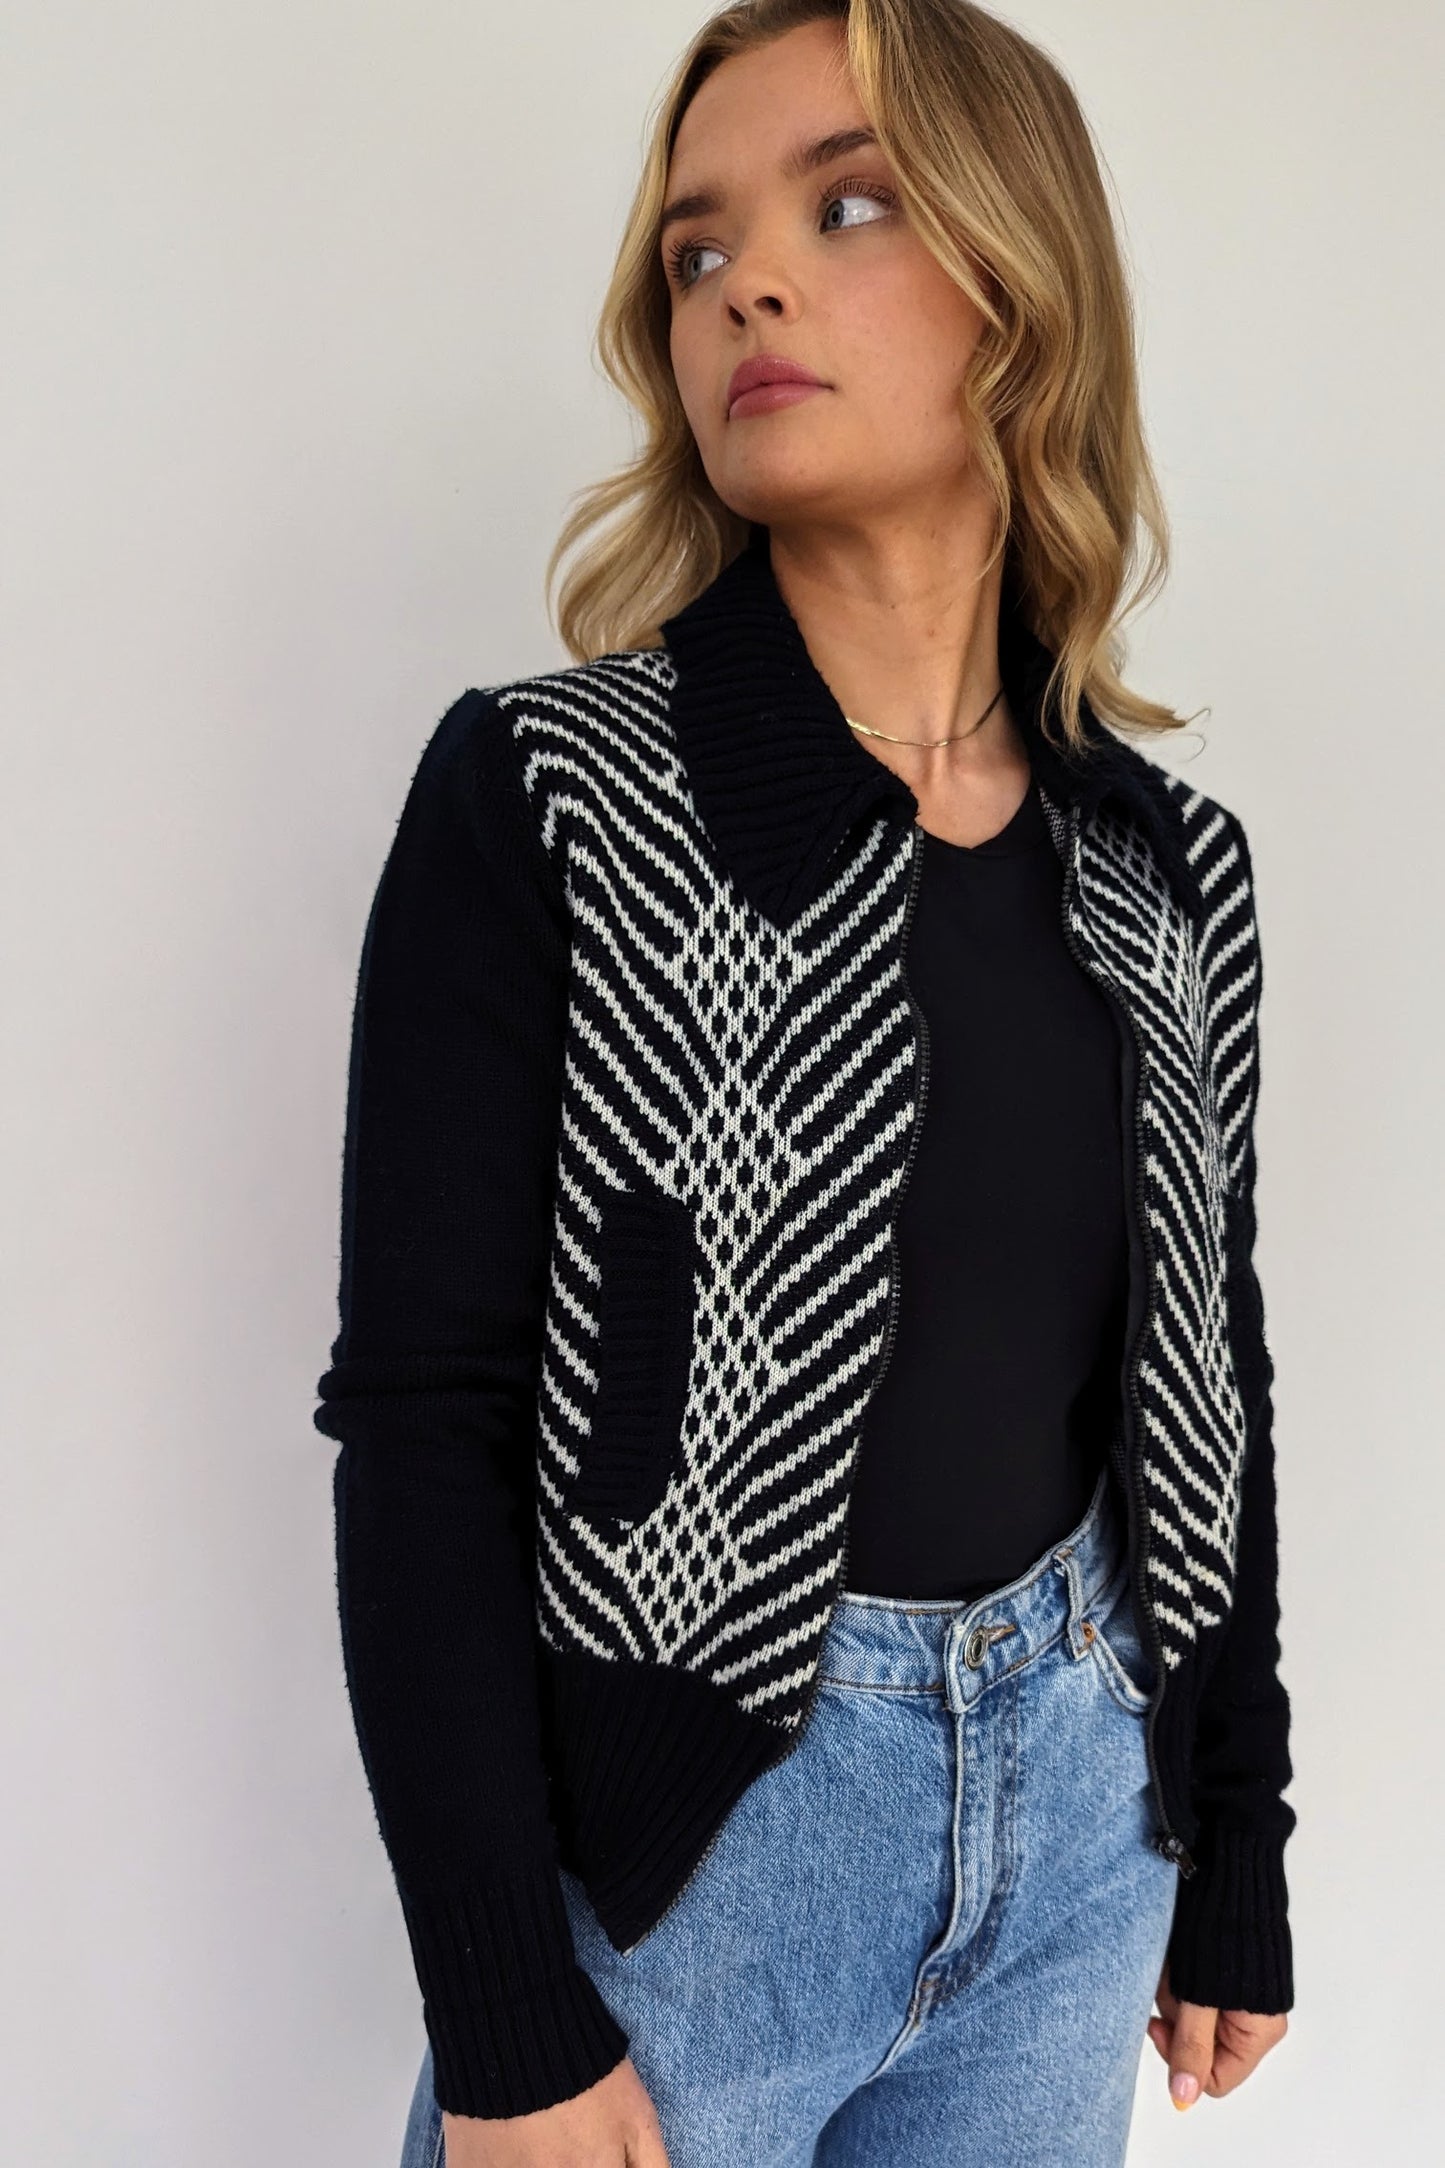 black and white short 60s cardigan with zip and pockets with chevron